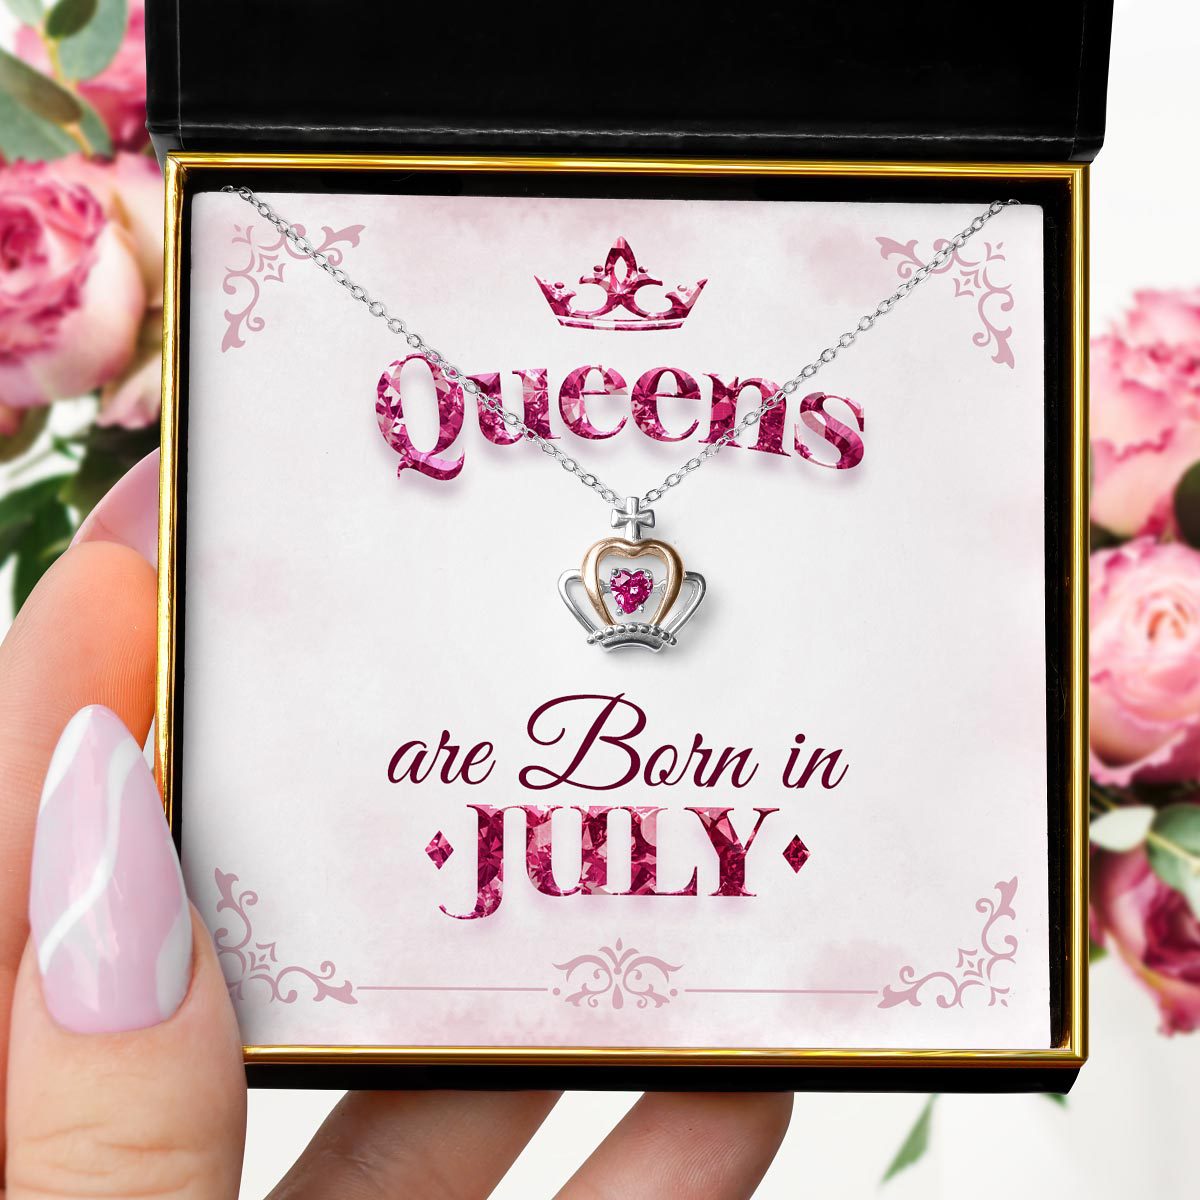 Queens Are Born - Luxe Crown Birthstone Necklace Gift Set